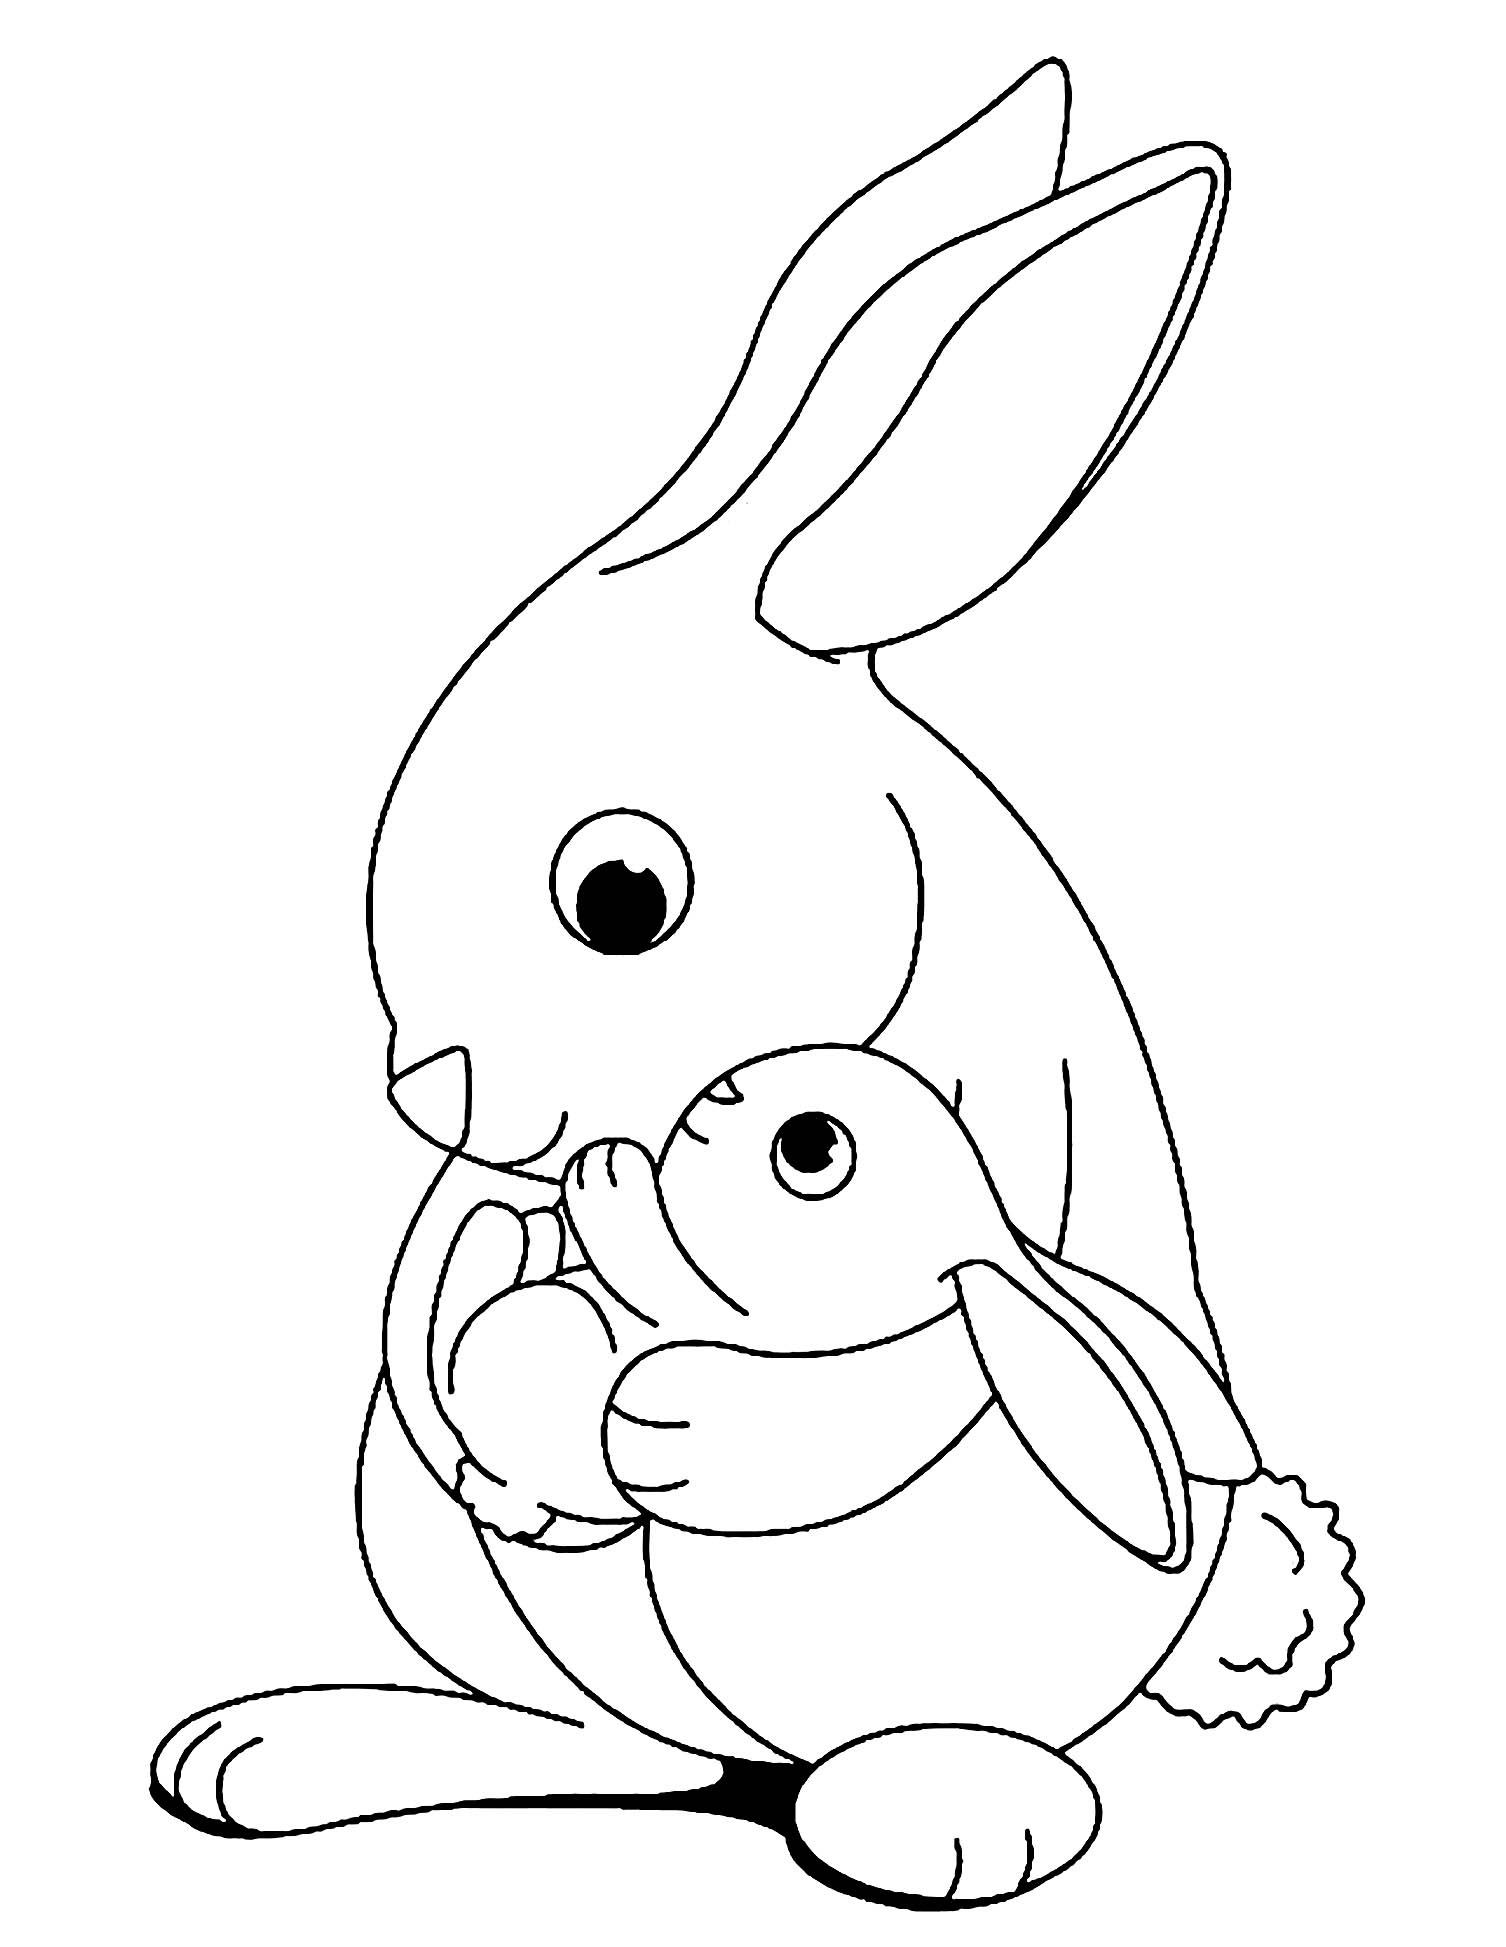 Free Rabbit Coloring Pages Rabbit To Print For Free Rabbit Kids Coloring Pages